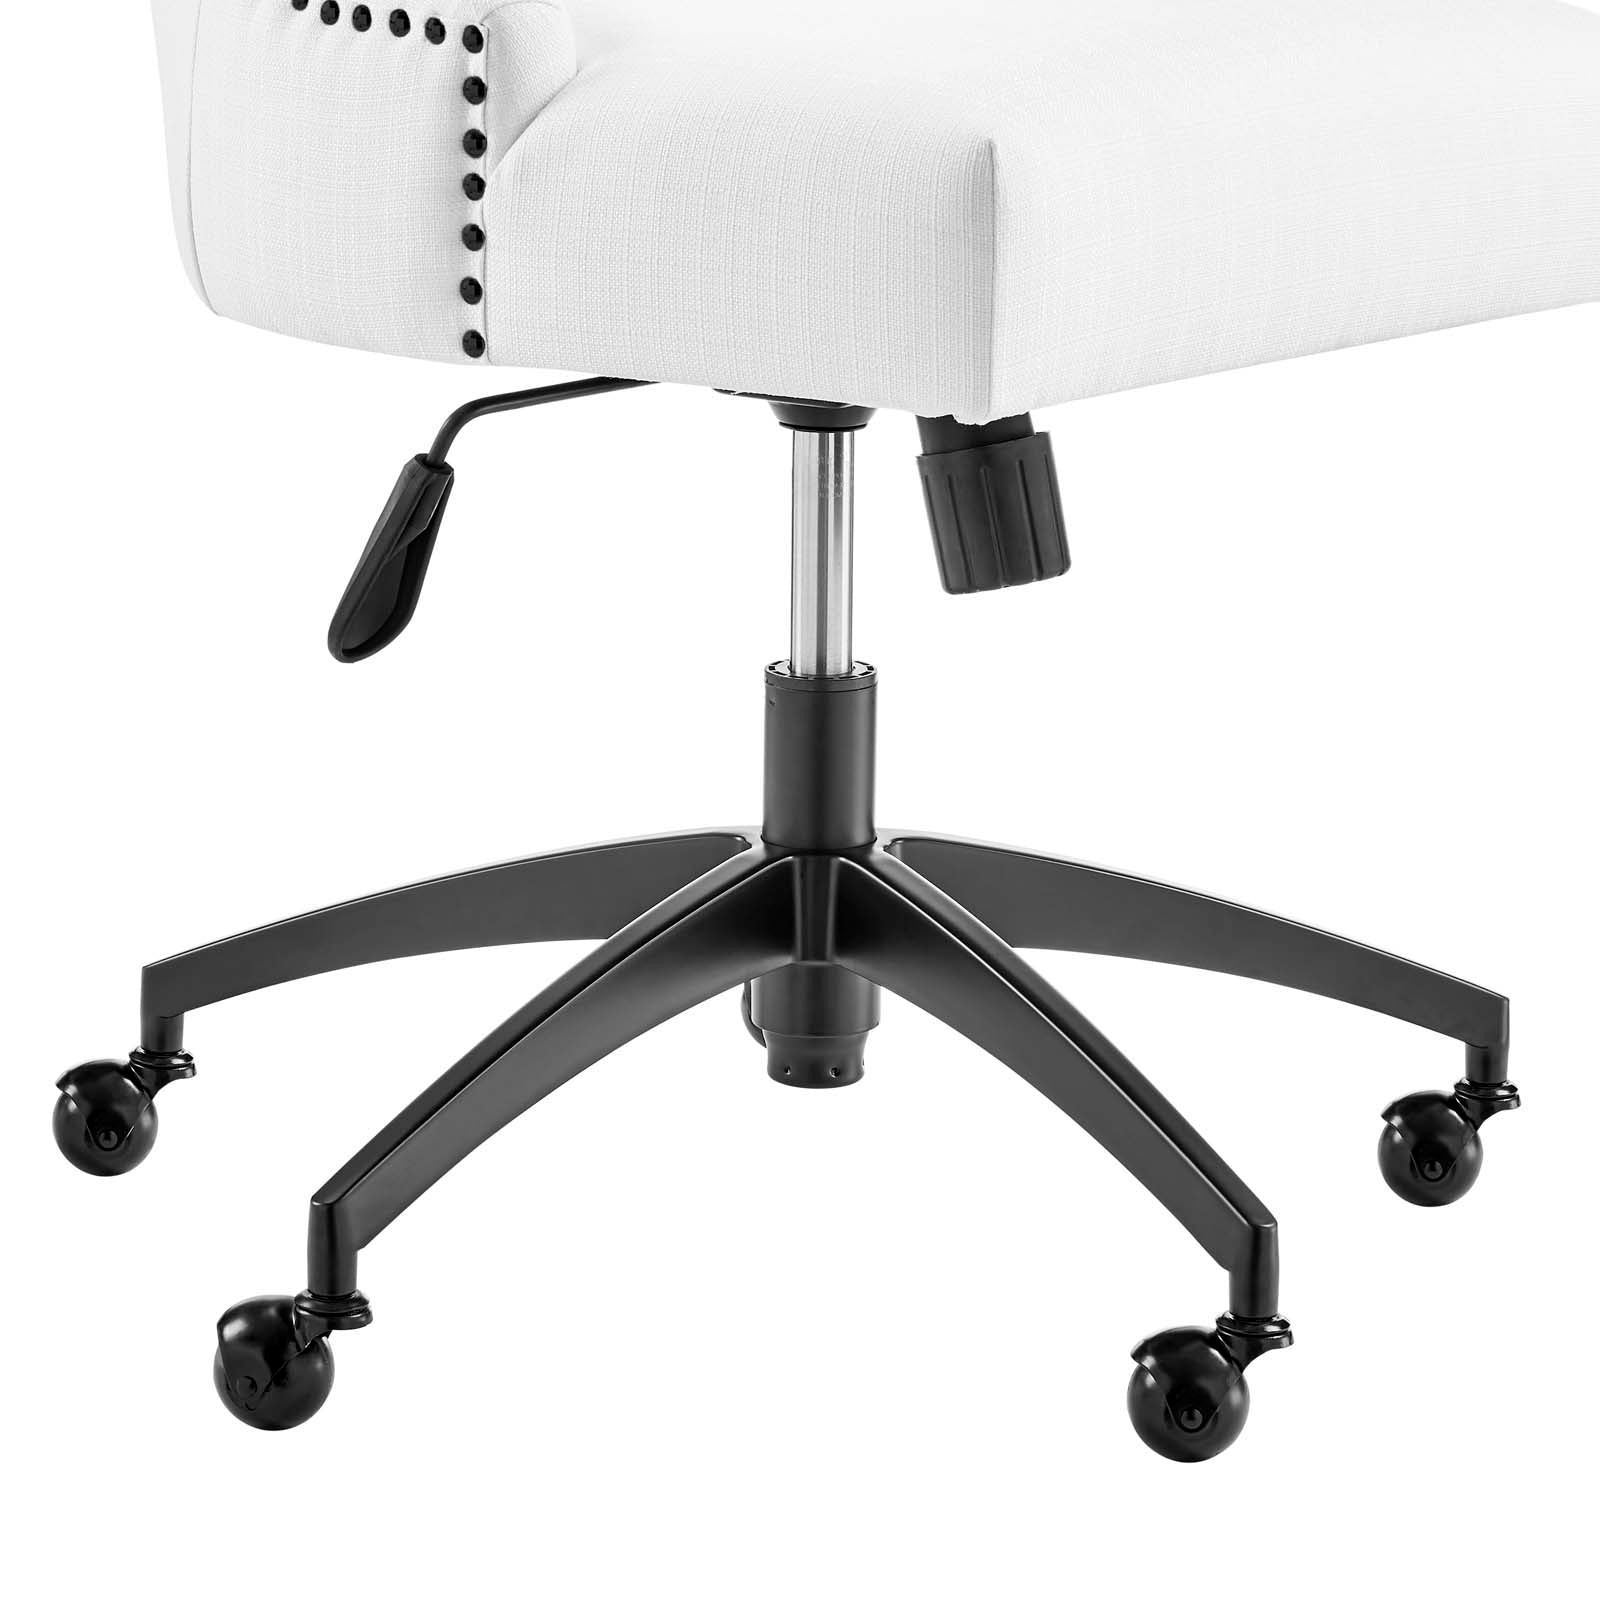 Modway Task Chairs - Empower Channel Tufted Fabric Office Chair Black White